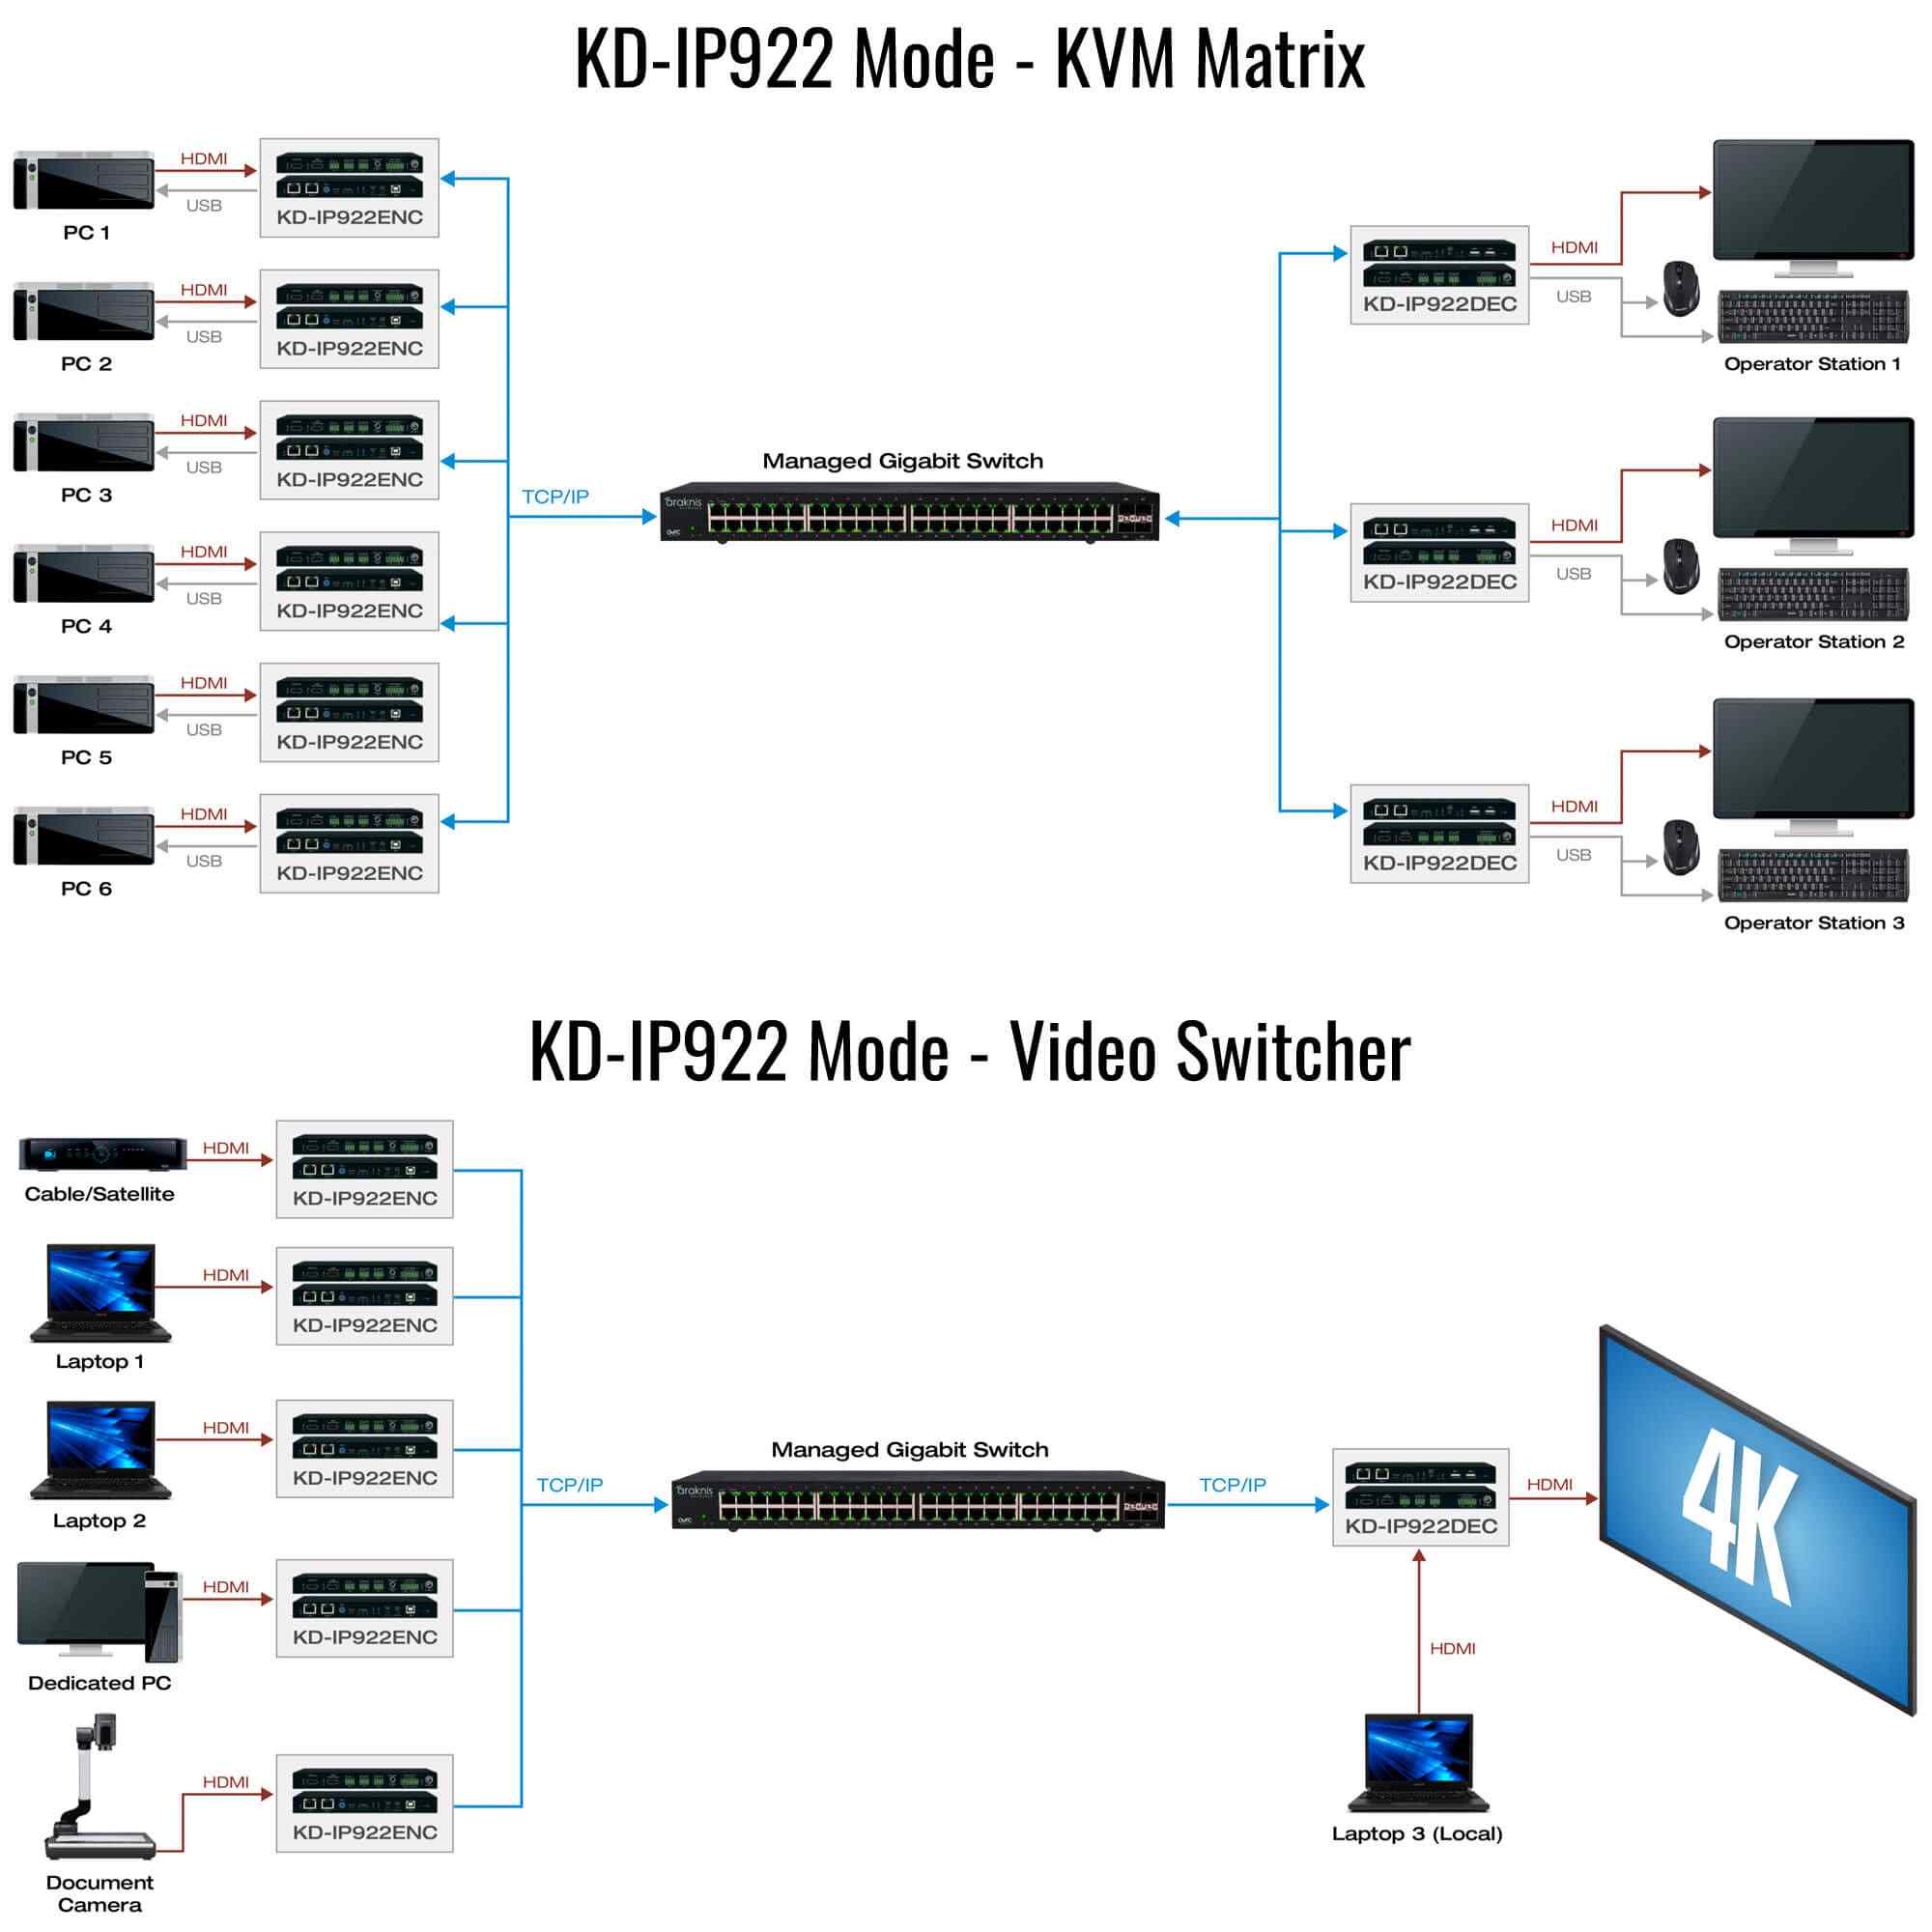 Thumbnail of Example Diagram showing video matrix and video switcher of 4k over ip